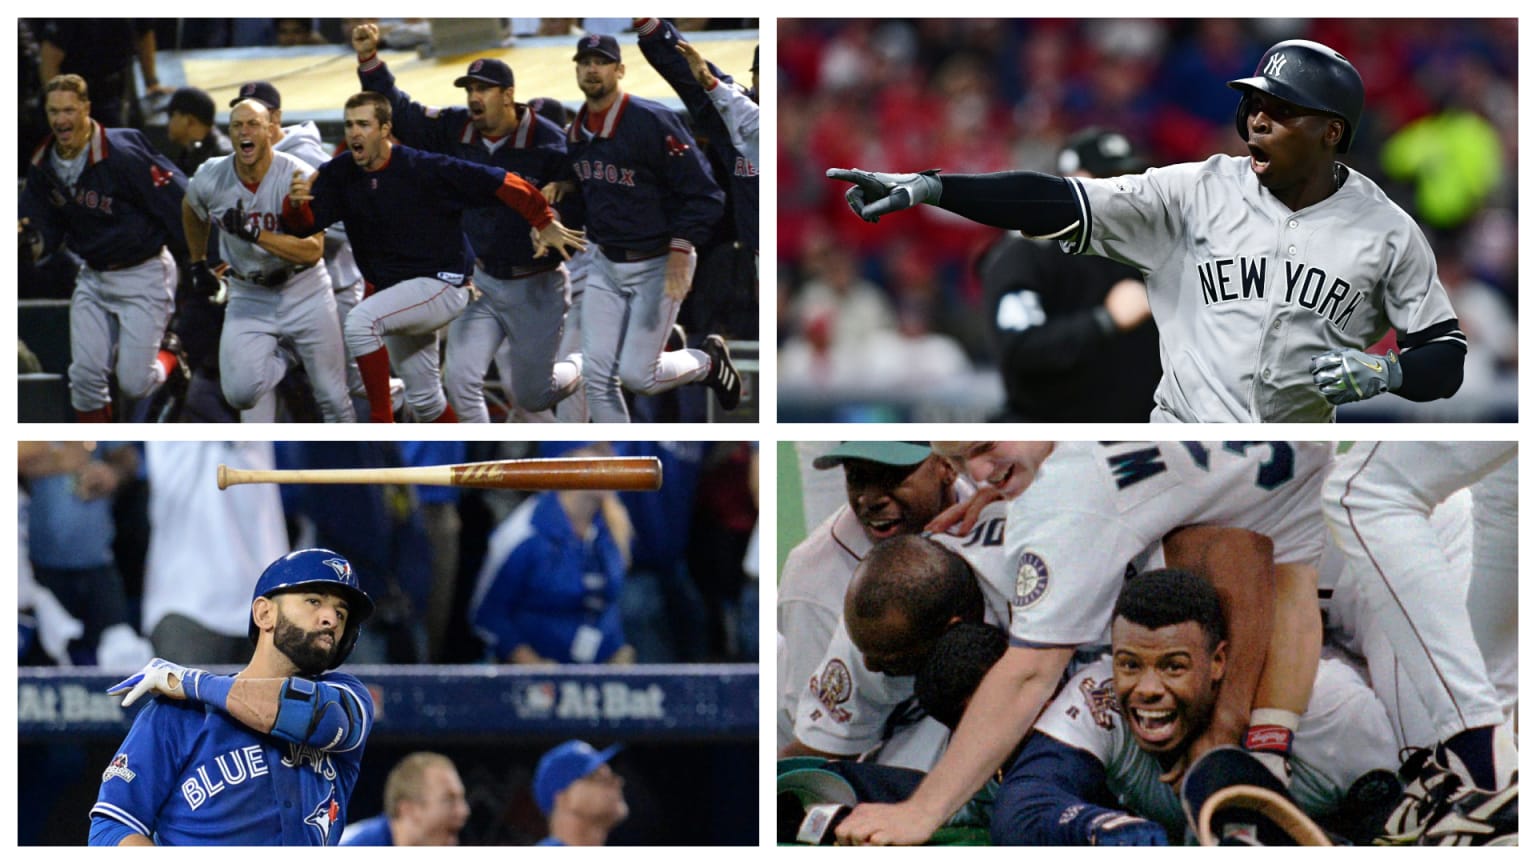 A split photo shows four different shots of baseball players celebrating